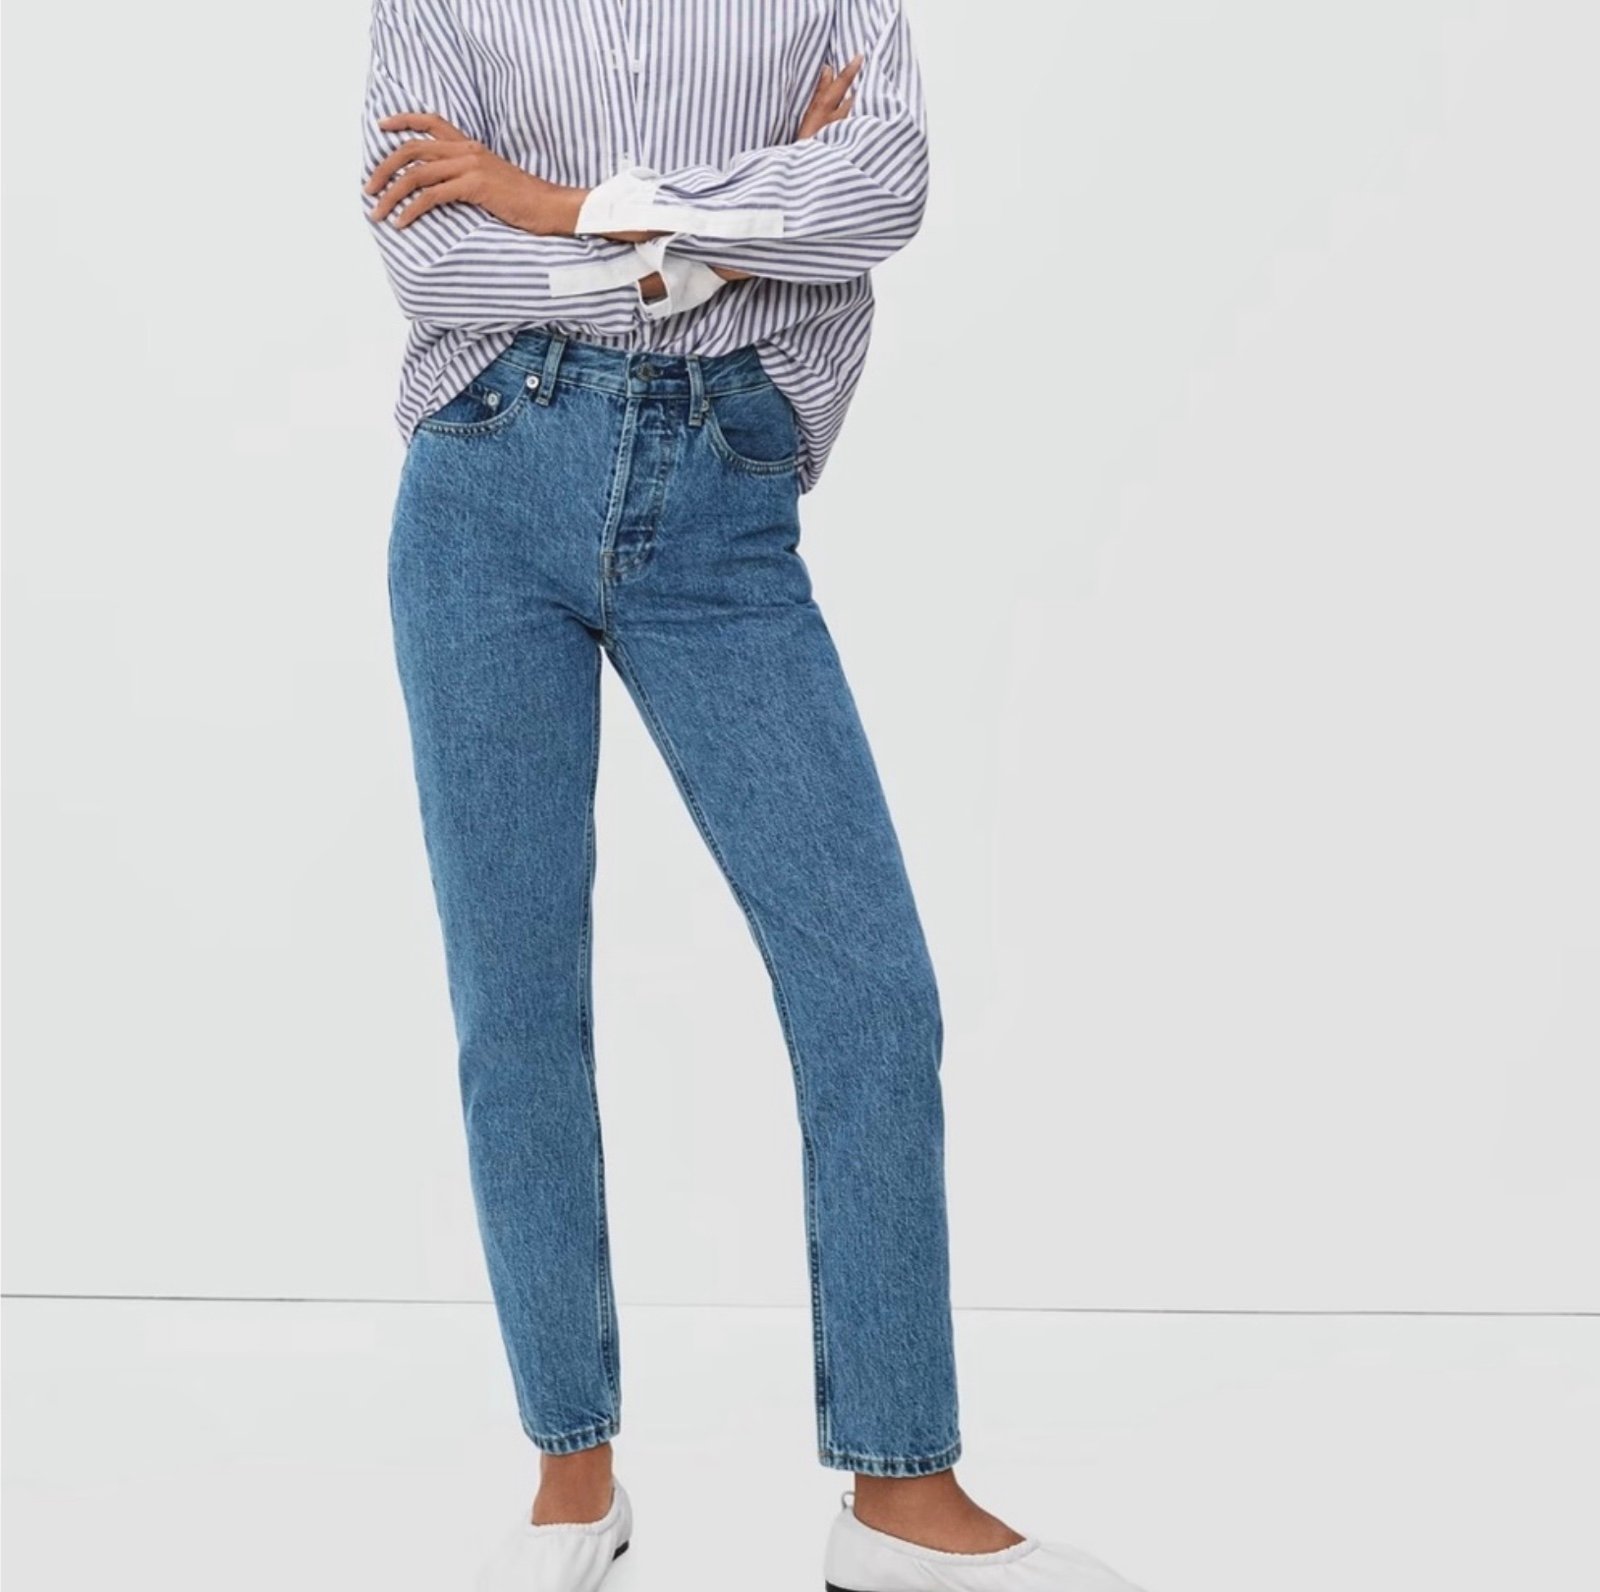 large discount everlane jeans hsF9Mf7ok Outlet Store